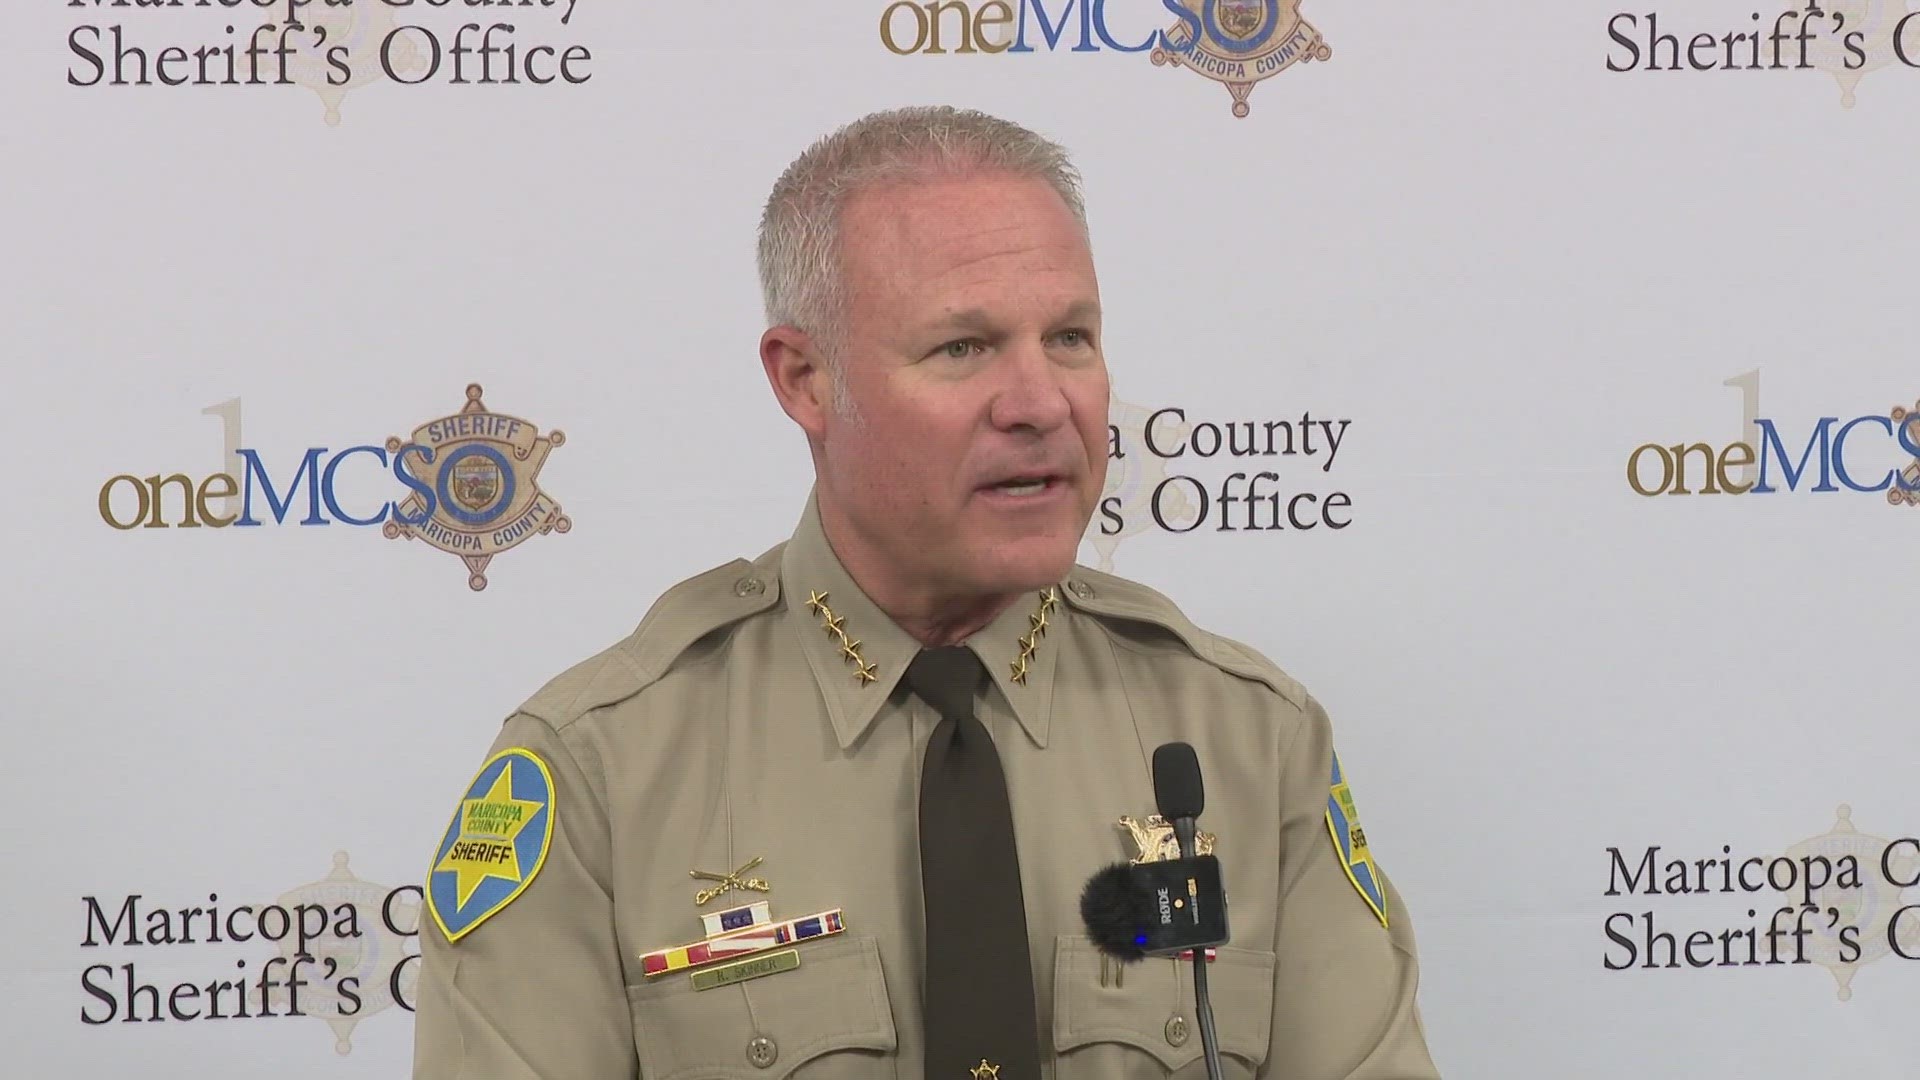 Maricopa County's new sheriff Russ Skinner wasted no time in announcing he plans to run for a full four-year term in November.